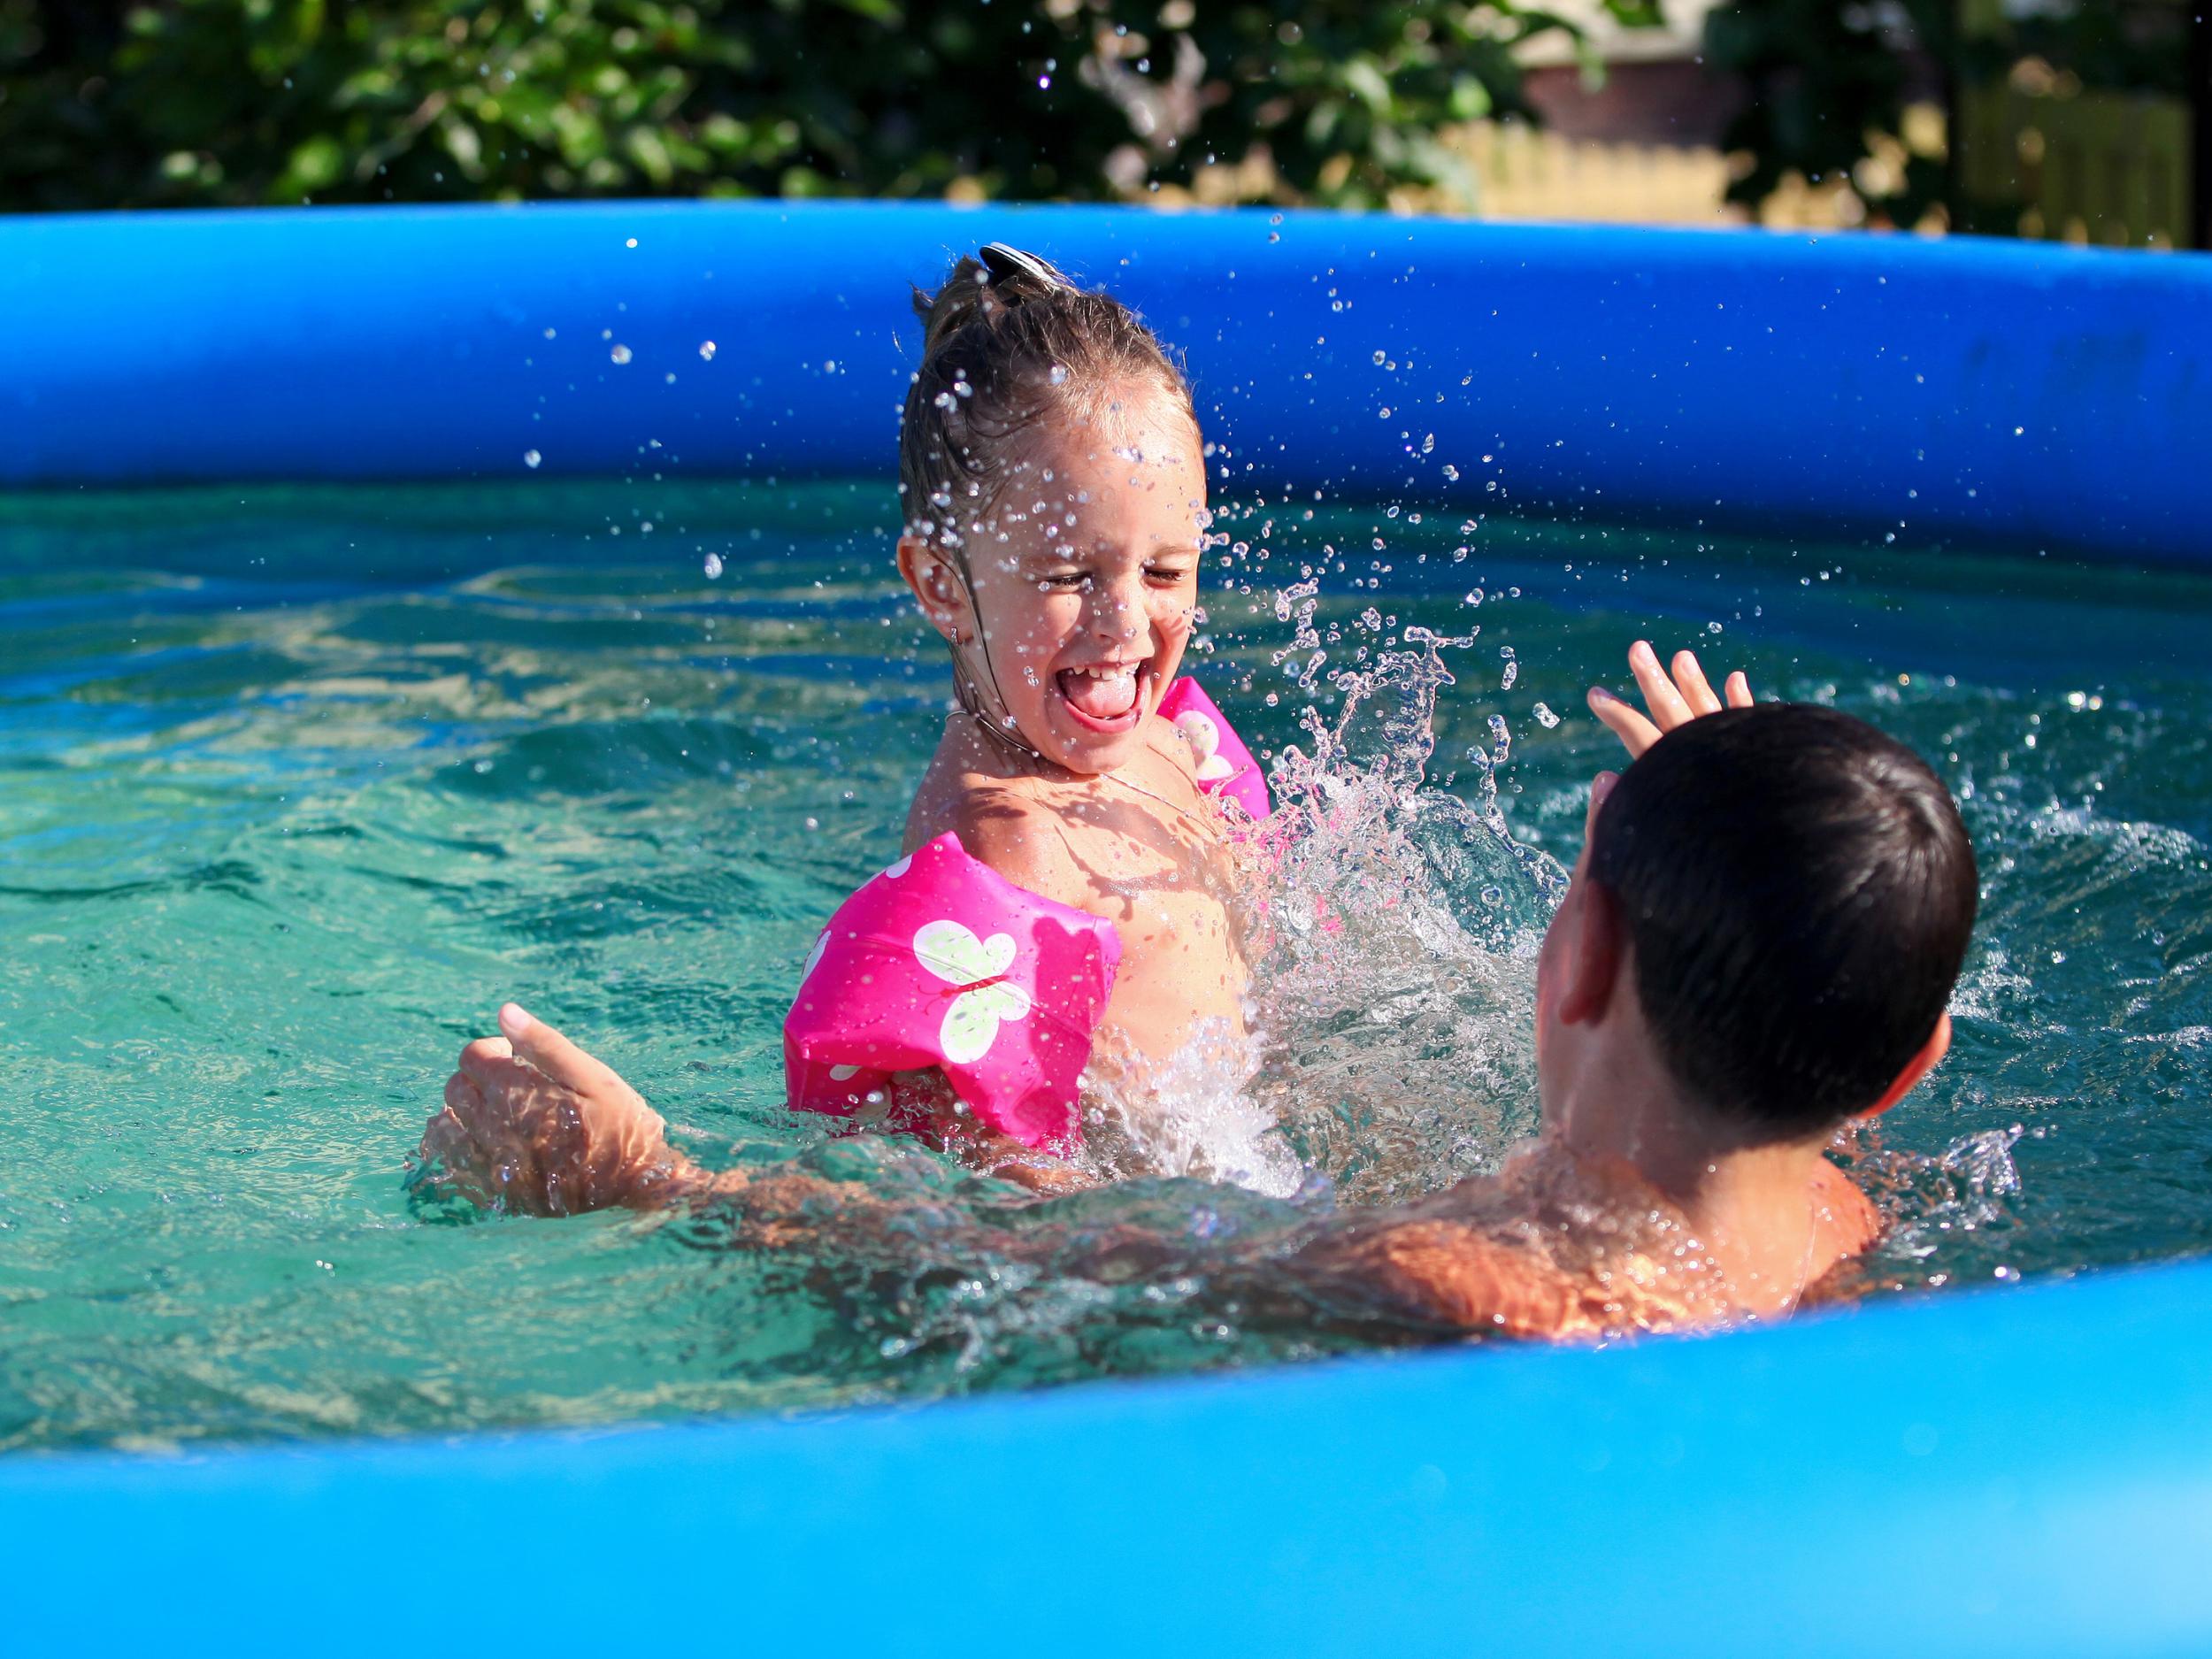 Paddling pools will put additional strain on the UK's water supply over the weekend, according to environment charity Hubbub